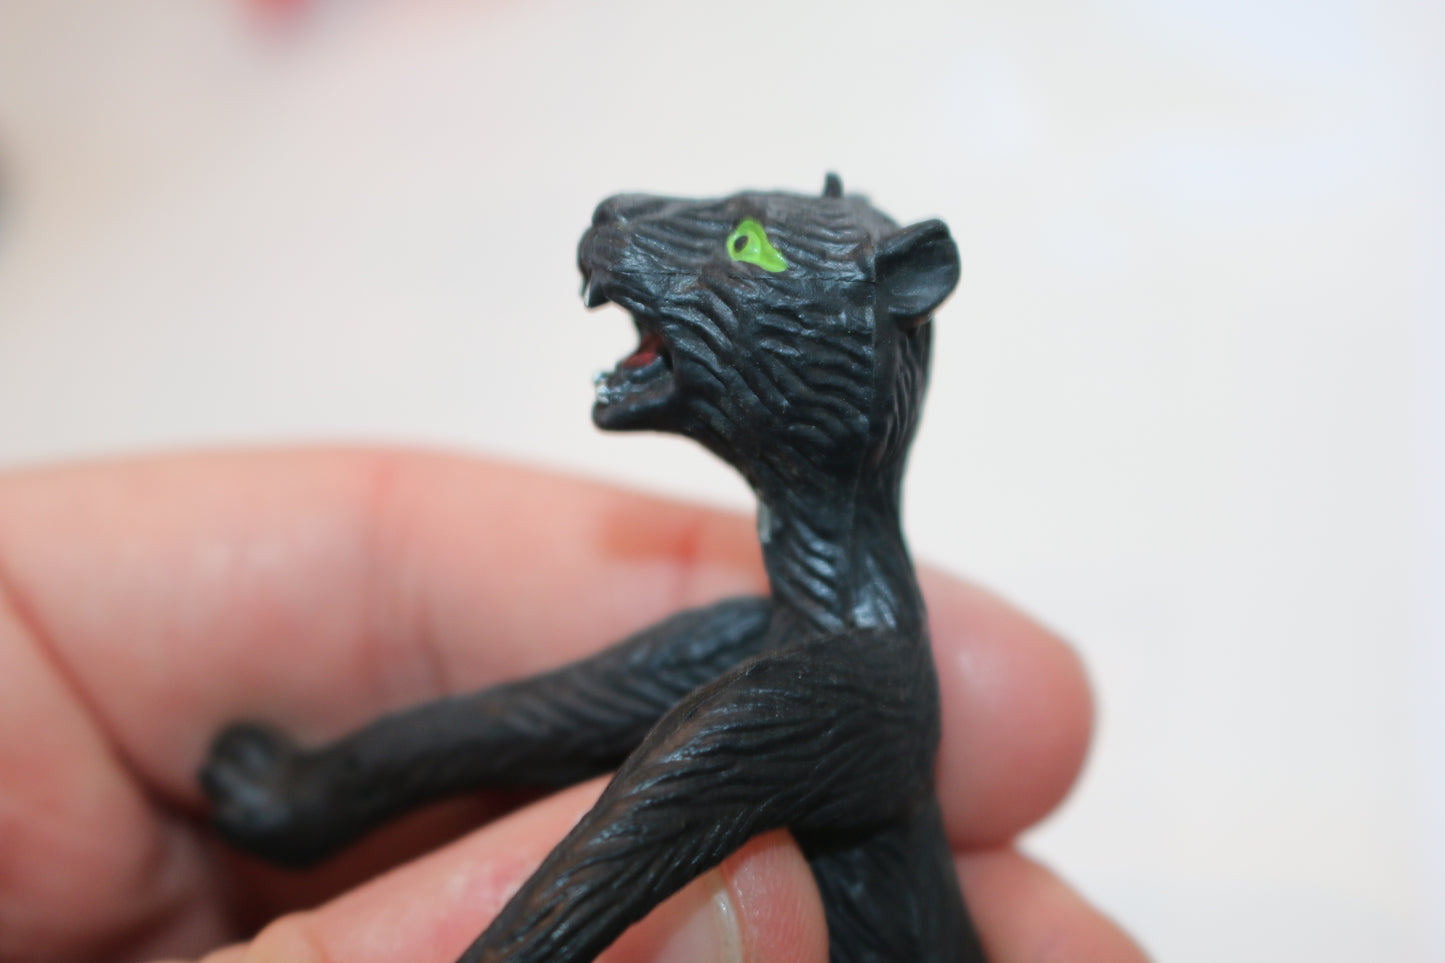 Vintage rare Black panther toy action figure Bendable w/ green eyes